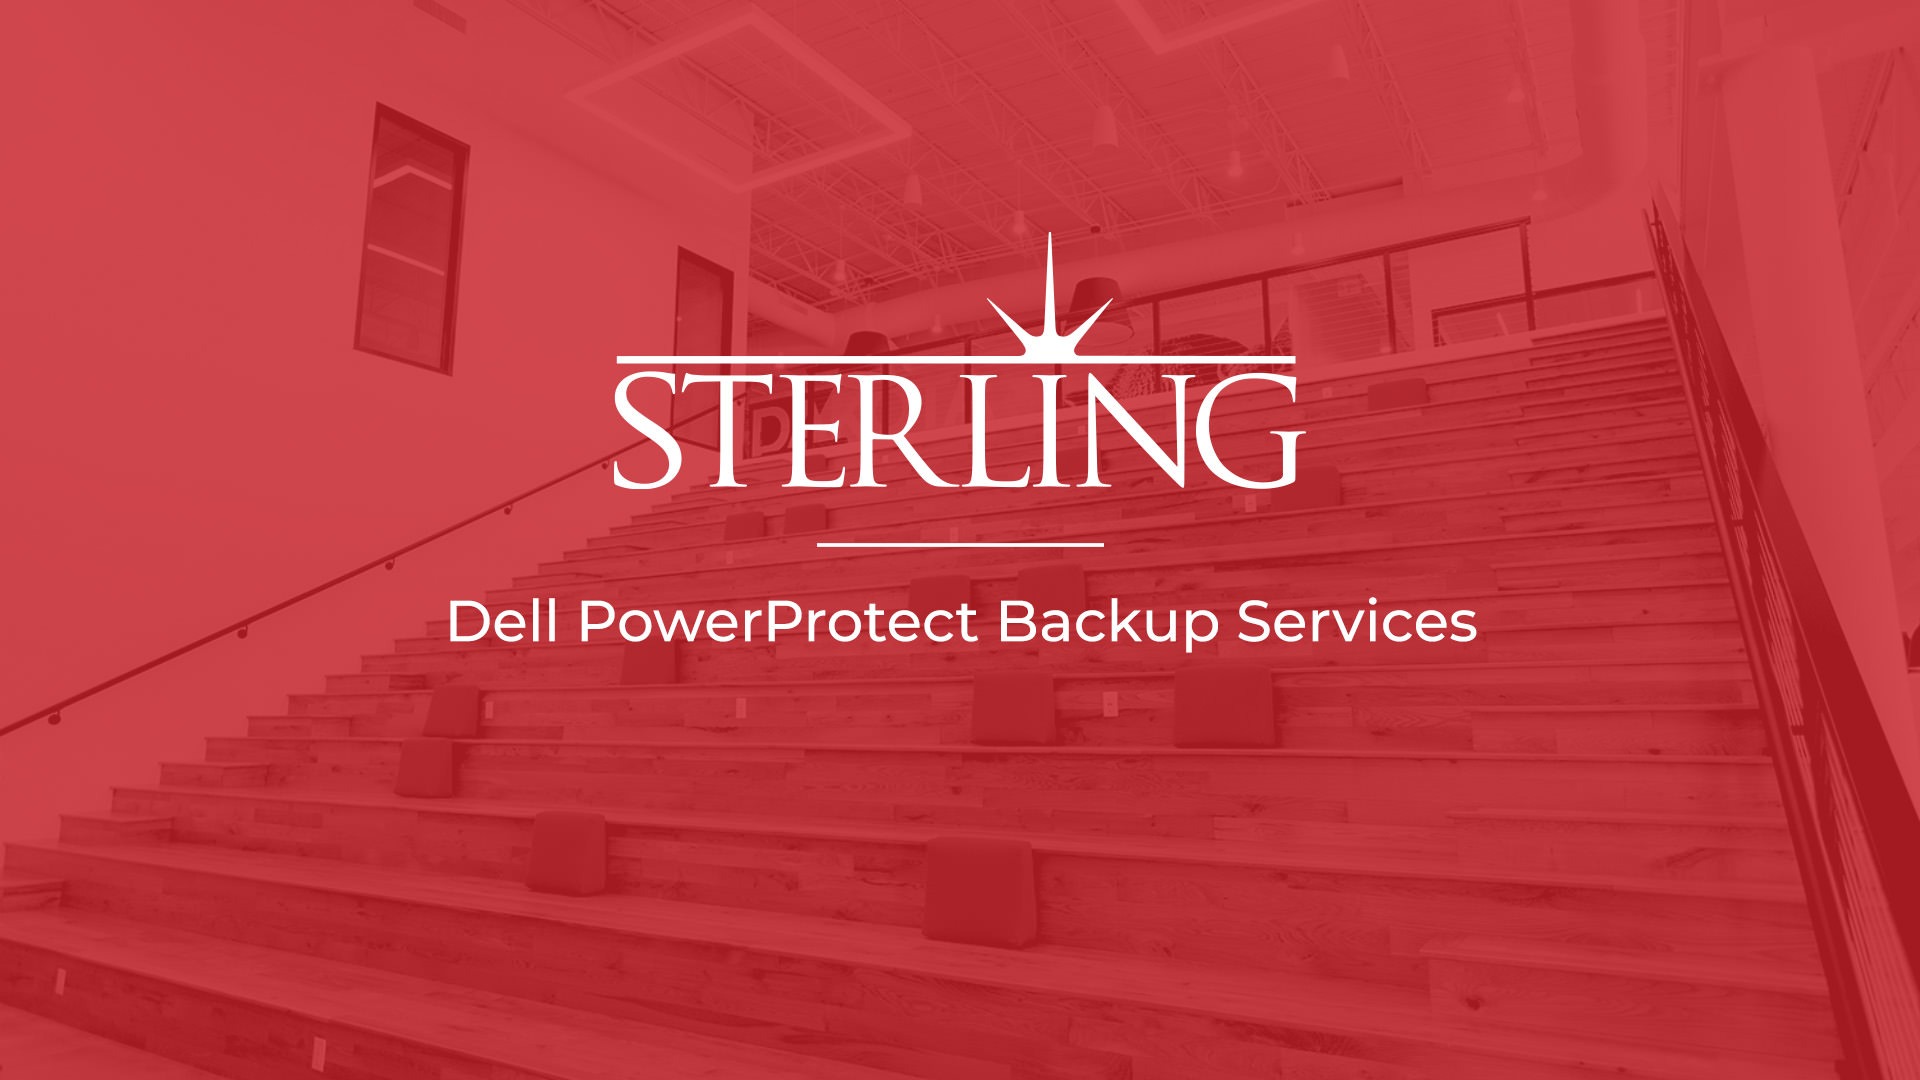 Dell PowerProtect Backup Services